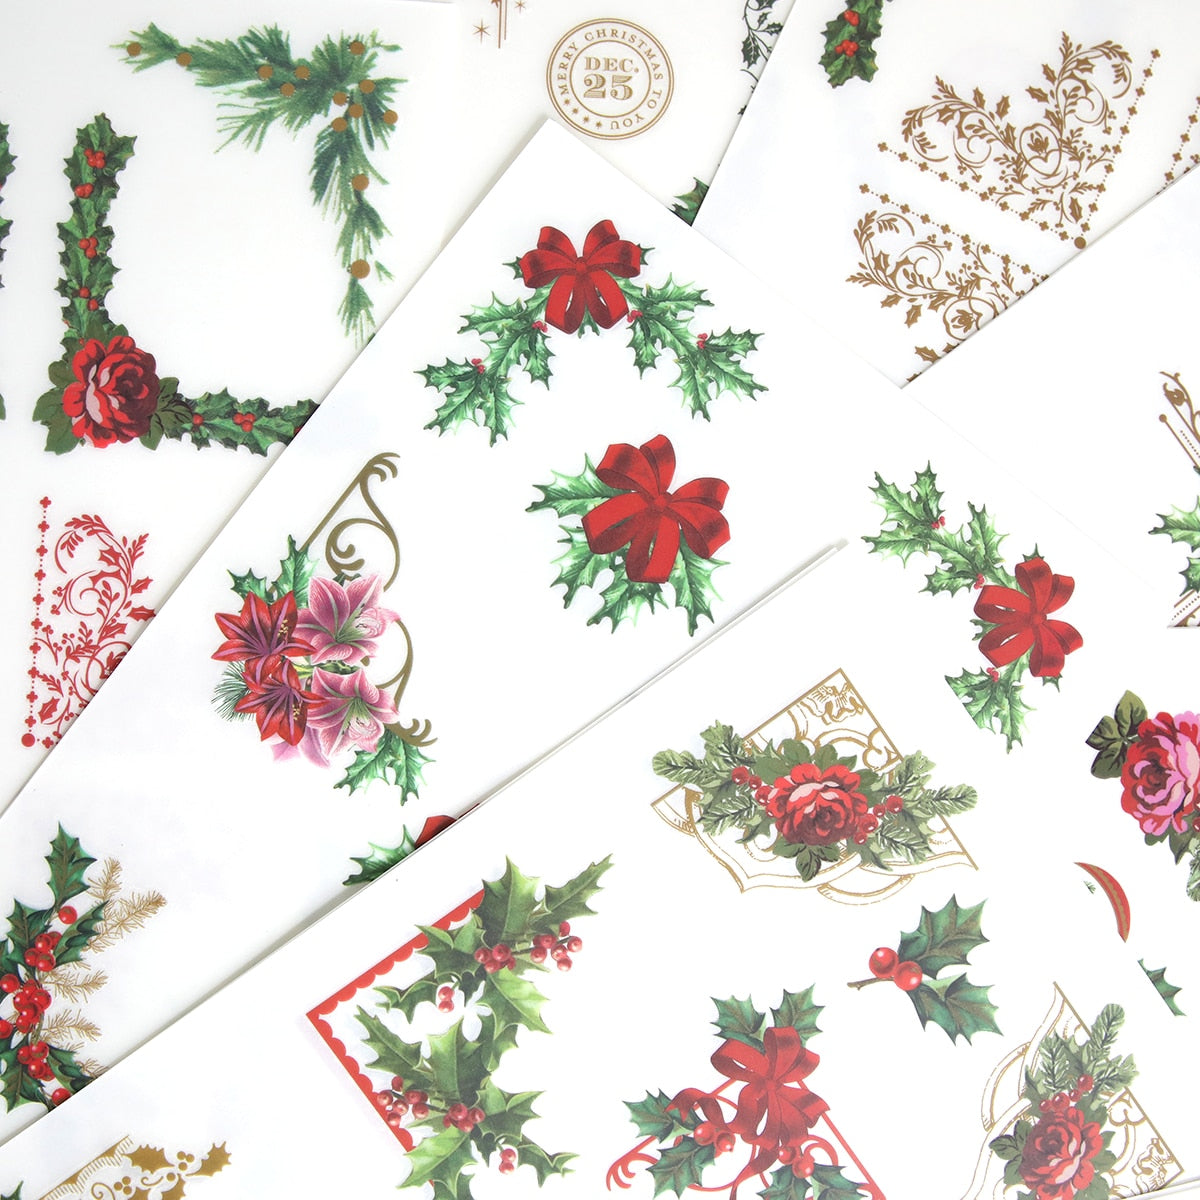 A collection of Christmas Ephemera Rub Ons with holly leaves and berries.